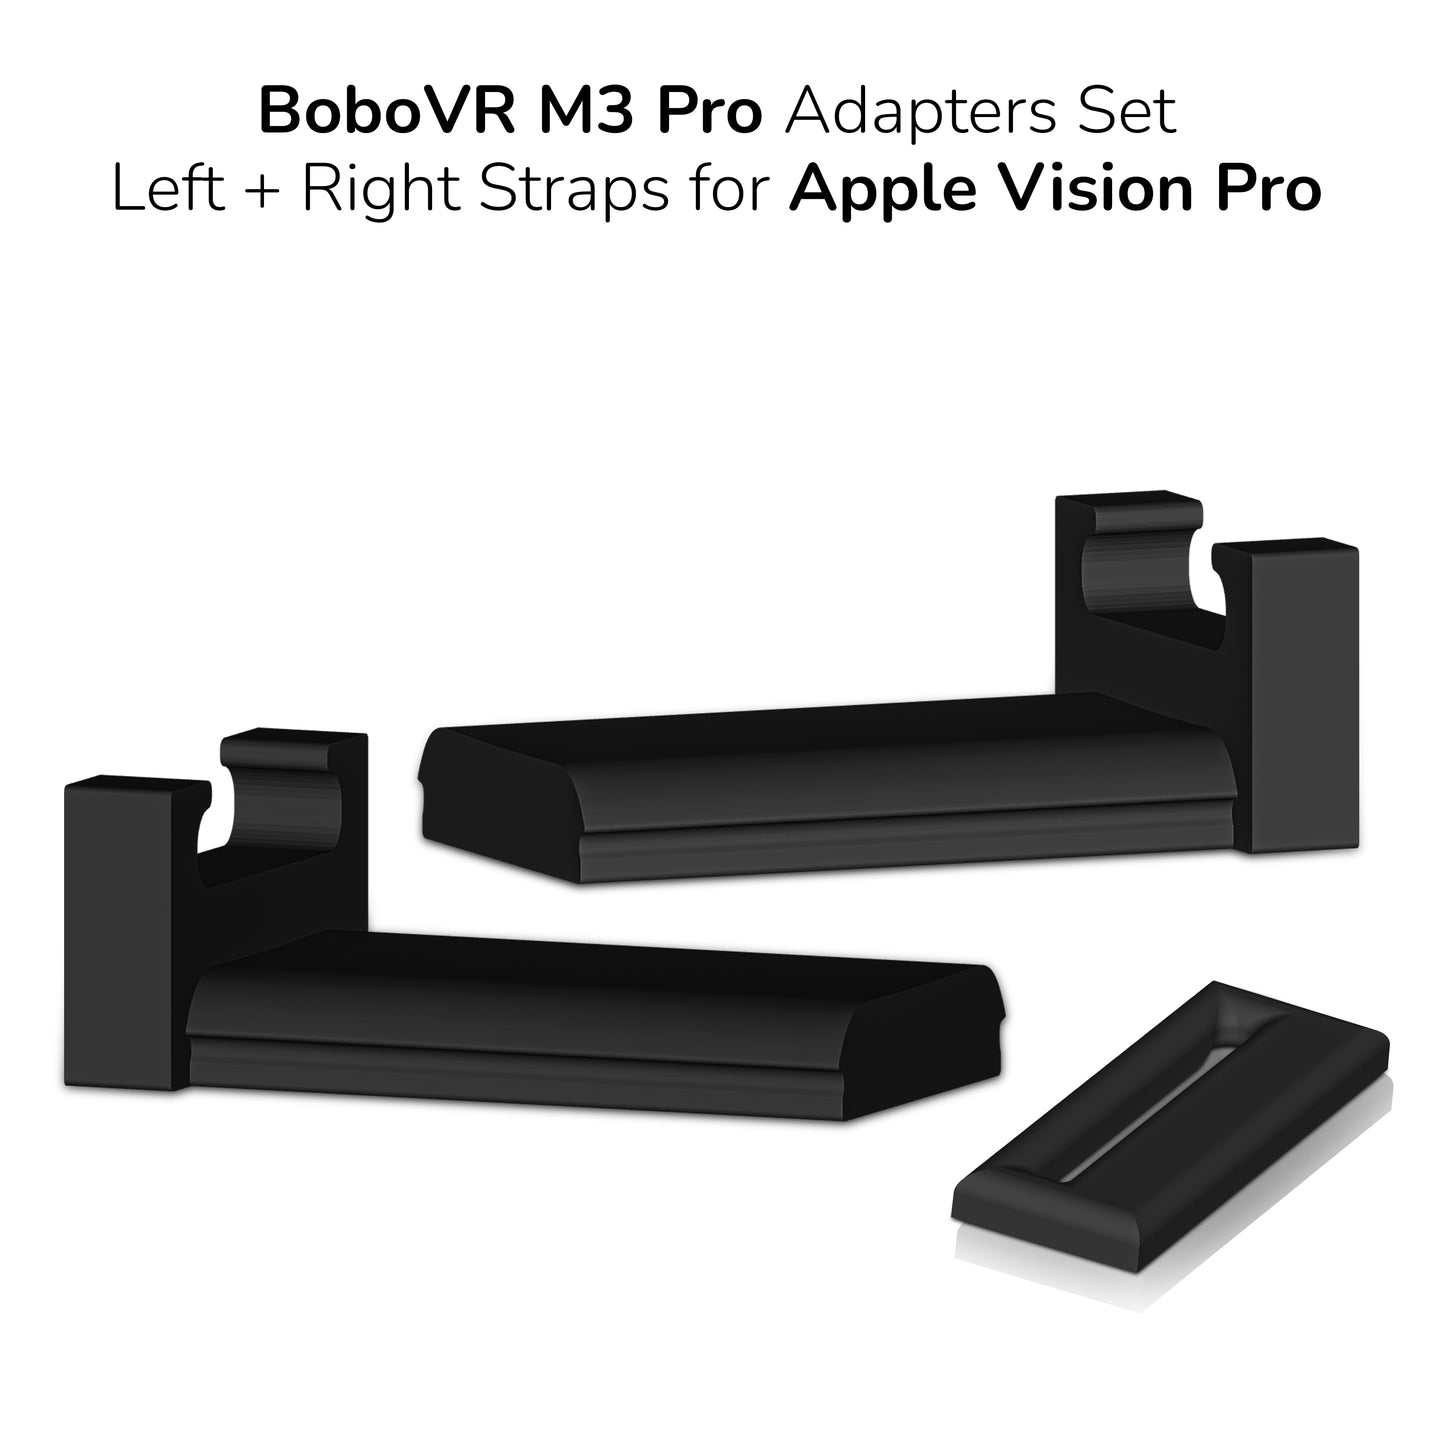 Two black adapters for left and right straps designed for Apple Vision Pro VR headset